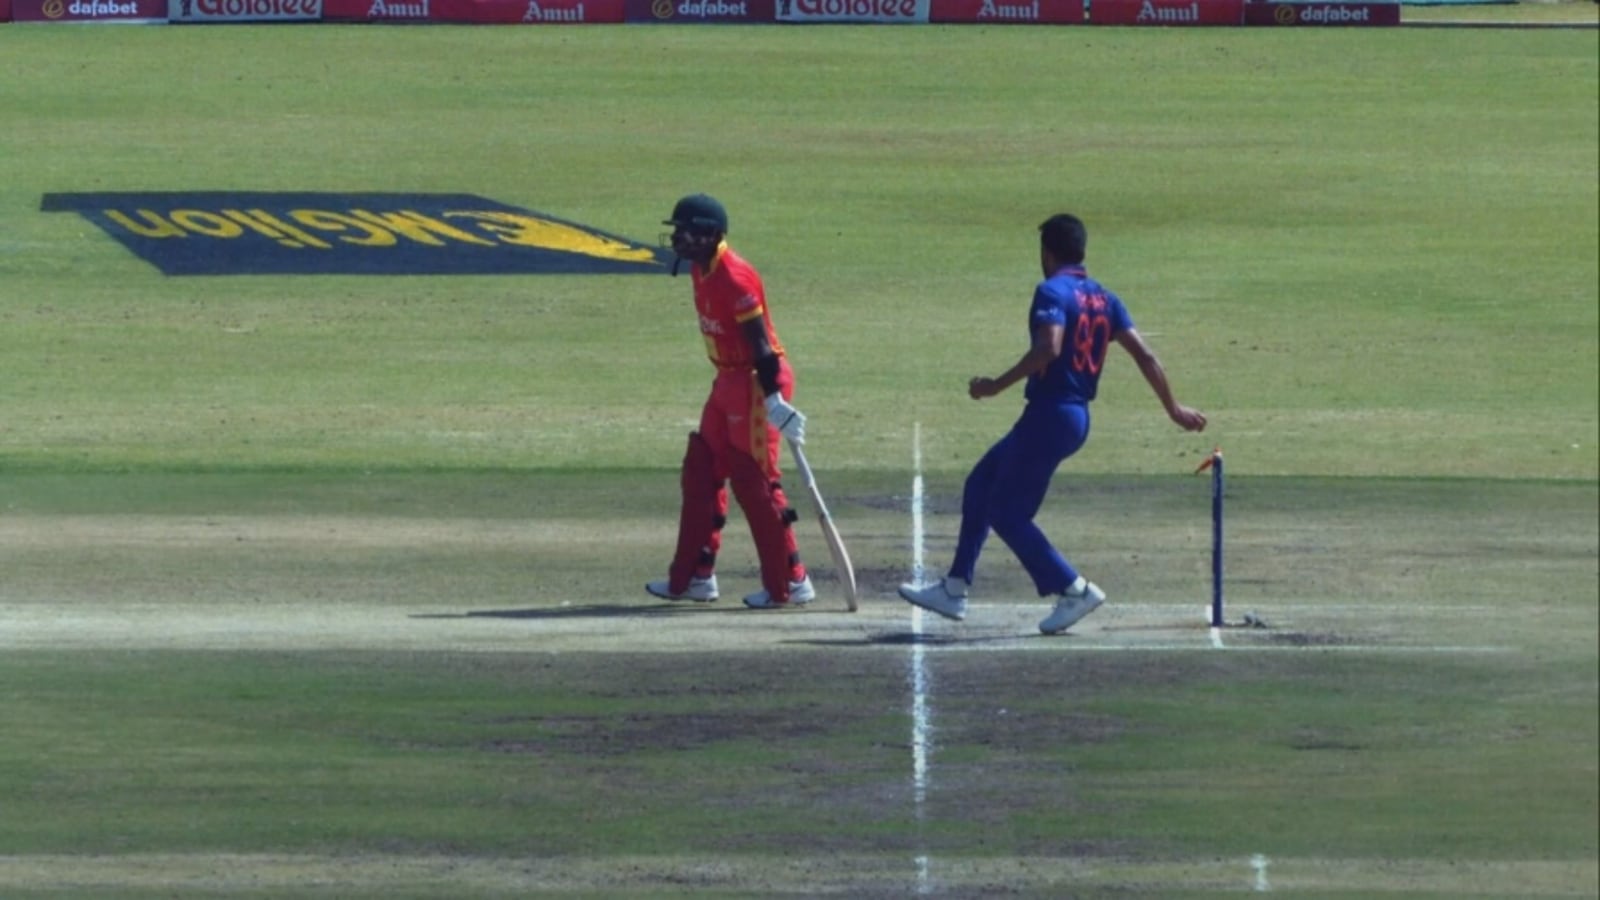 watch-deepak-chahar-shoots-unexpected-mankad-warning-to-zim-opener-knocks-over-bails-at-non-striker-s-end-in-3rd-odi